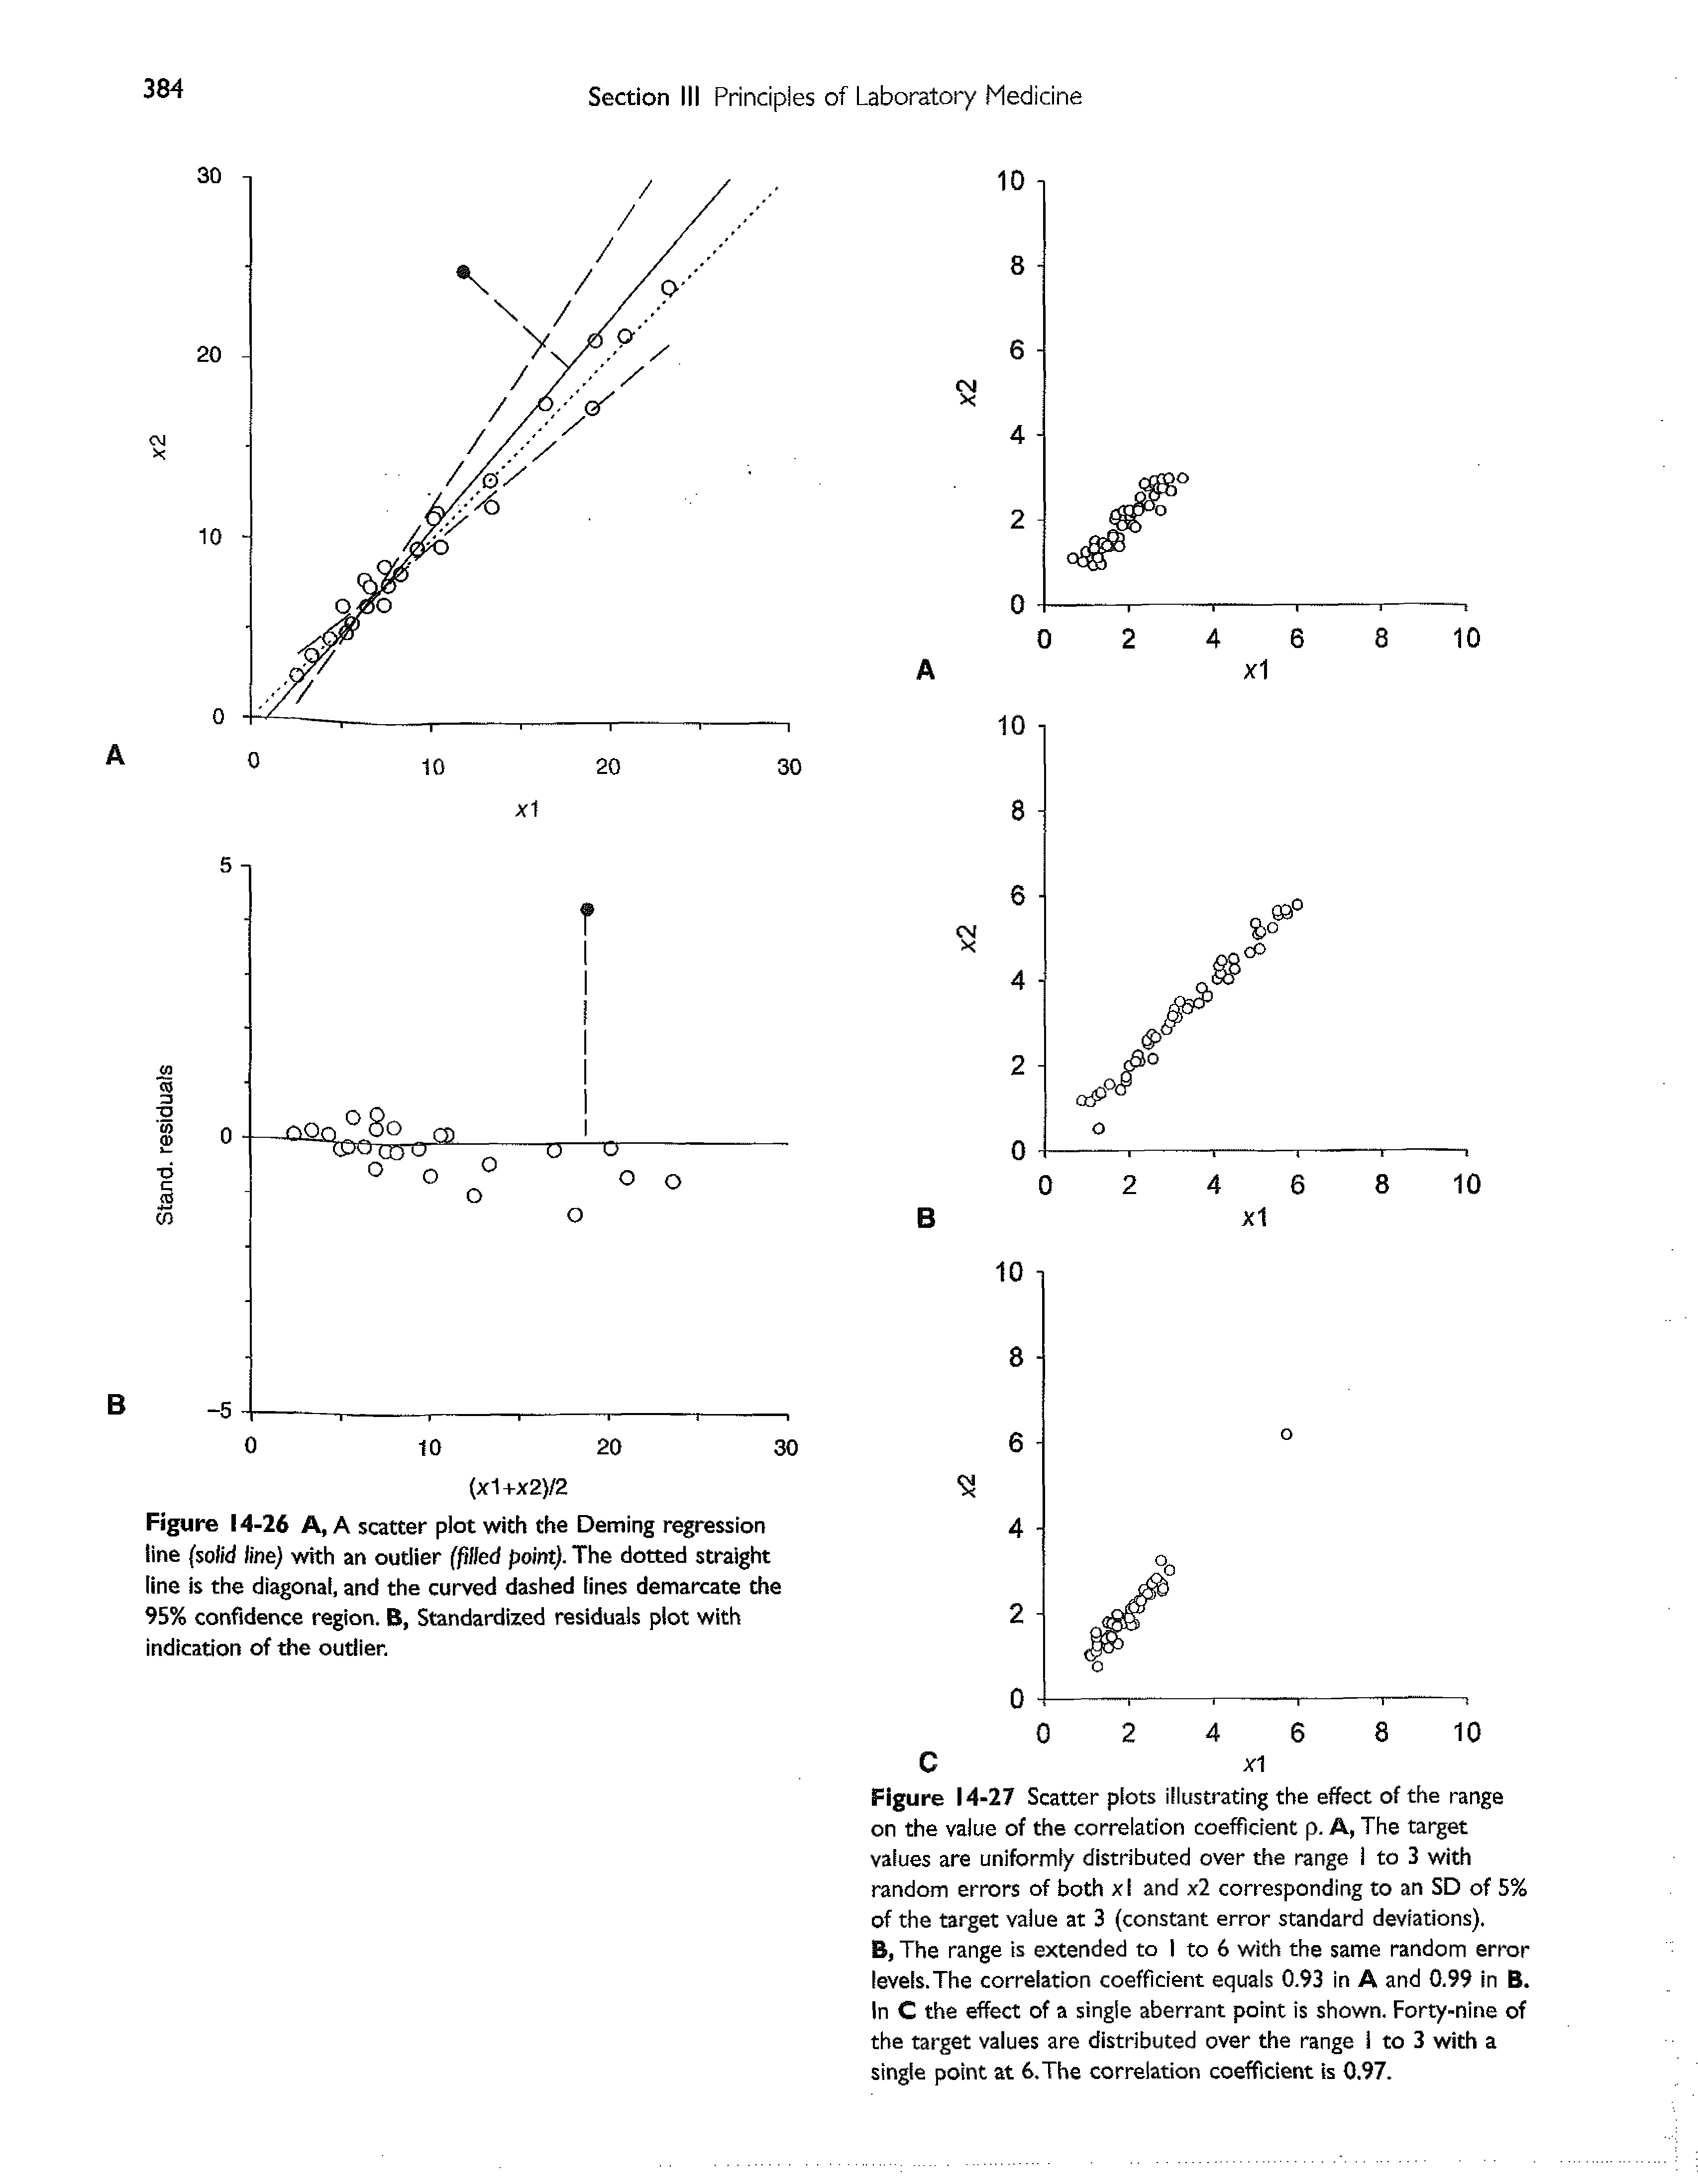 Figure 14-26 A, A scatter plot with the Deming regression line (solid line) with an outlier (filled point). The dotted straight line is the diagonal, and the curved dashed lines demarcate the 95% confidence region. B, Standardized residuals plot with indication of the outlier.